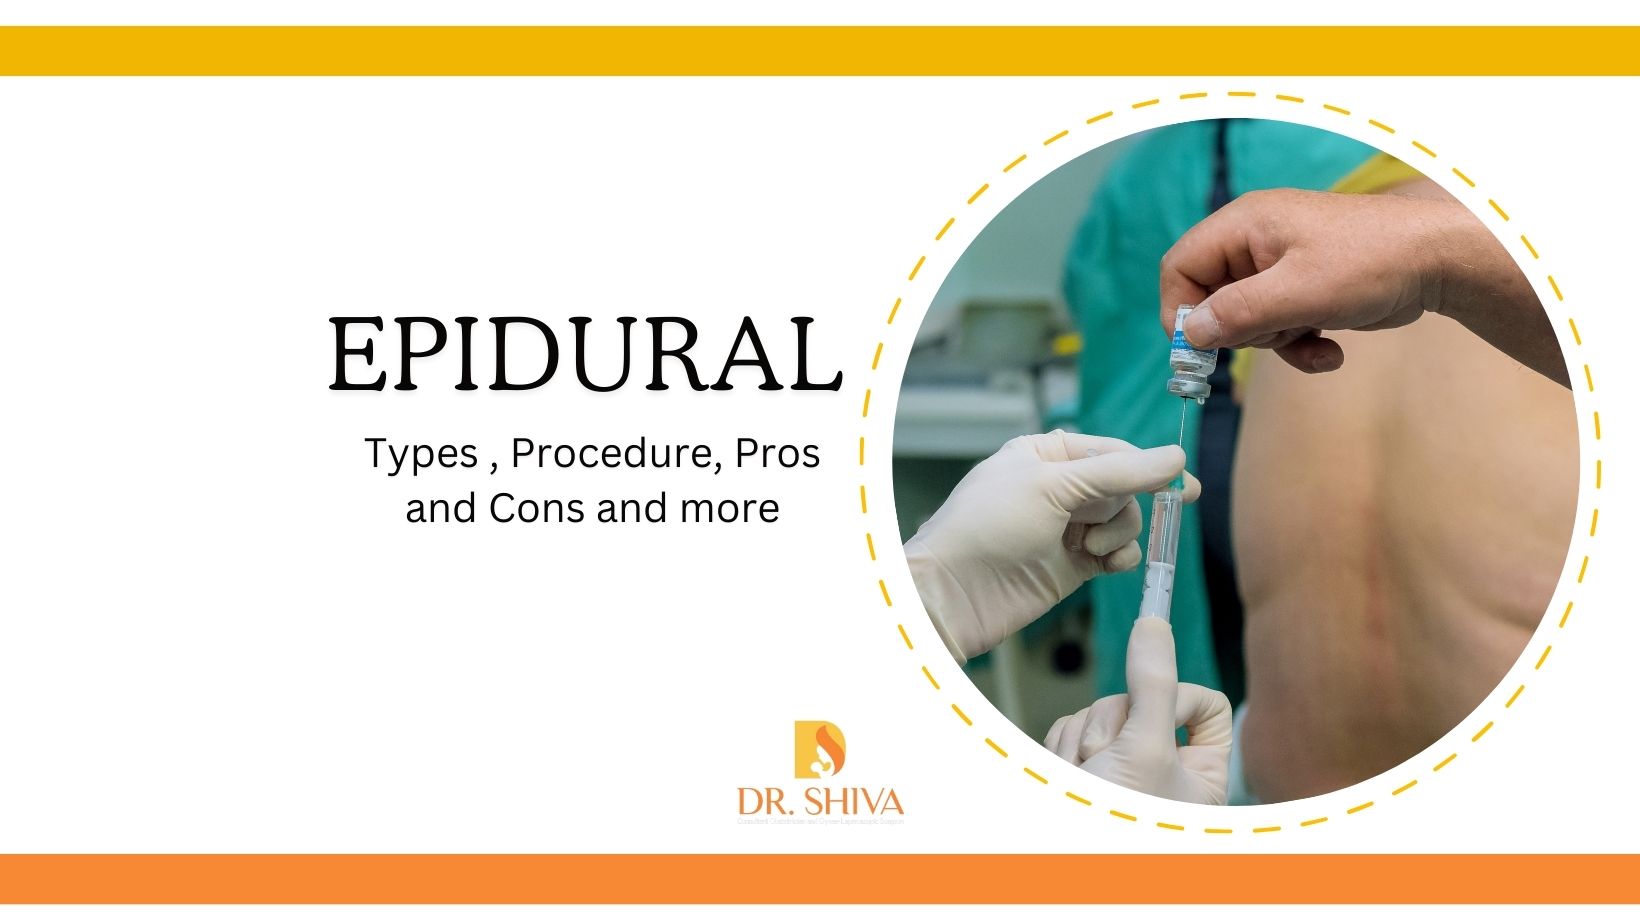 Epidural During Labor: Types, Procedure and More